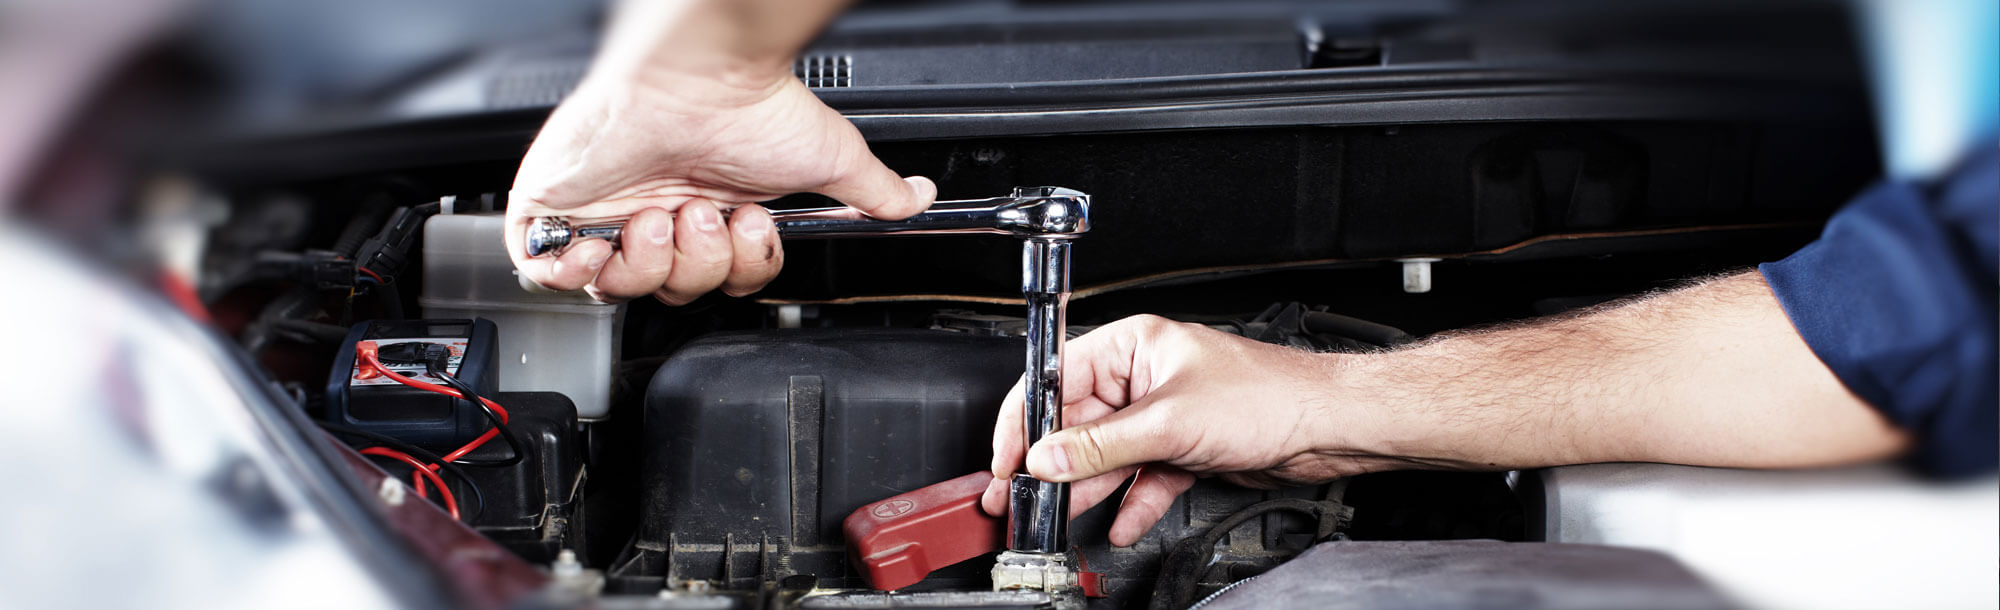 Mechanic tightening bolts under the hood of a car